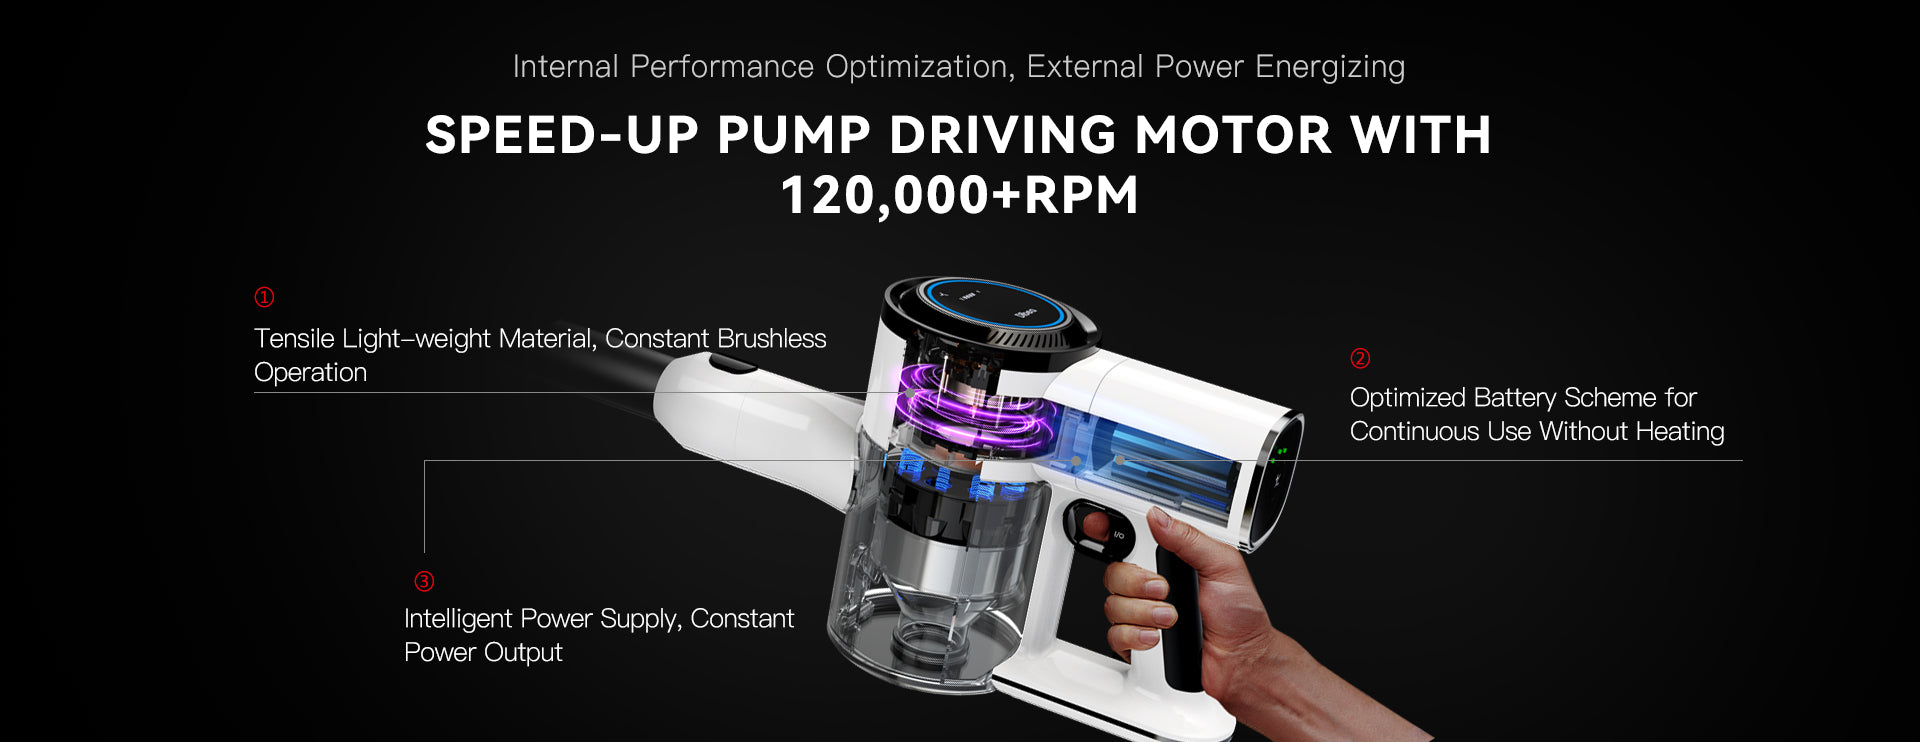 SPEED-UP_PUMP_DRIVING_MOTOR_WITH_120000_RPM